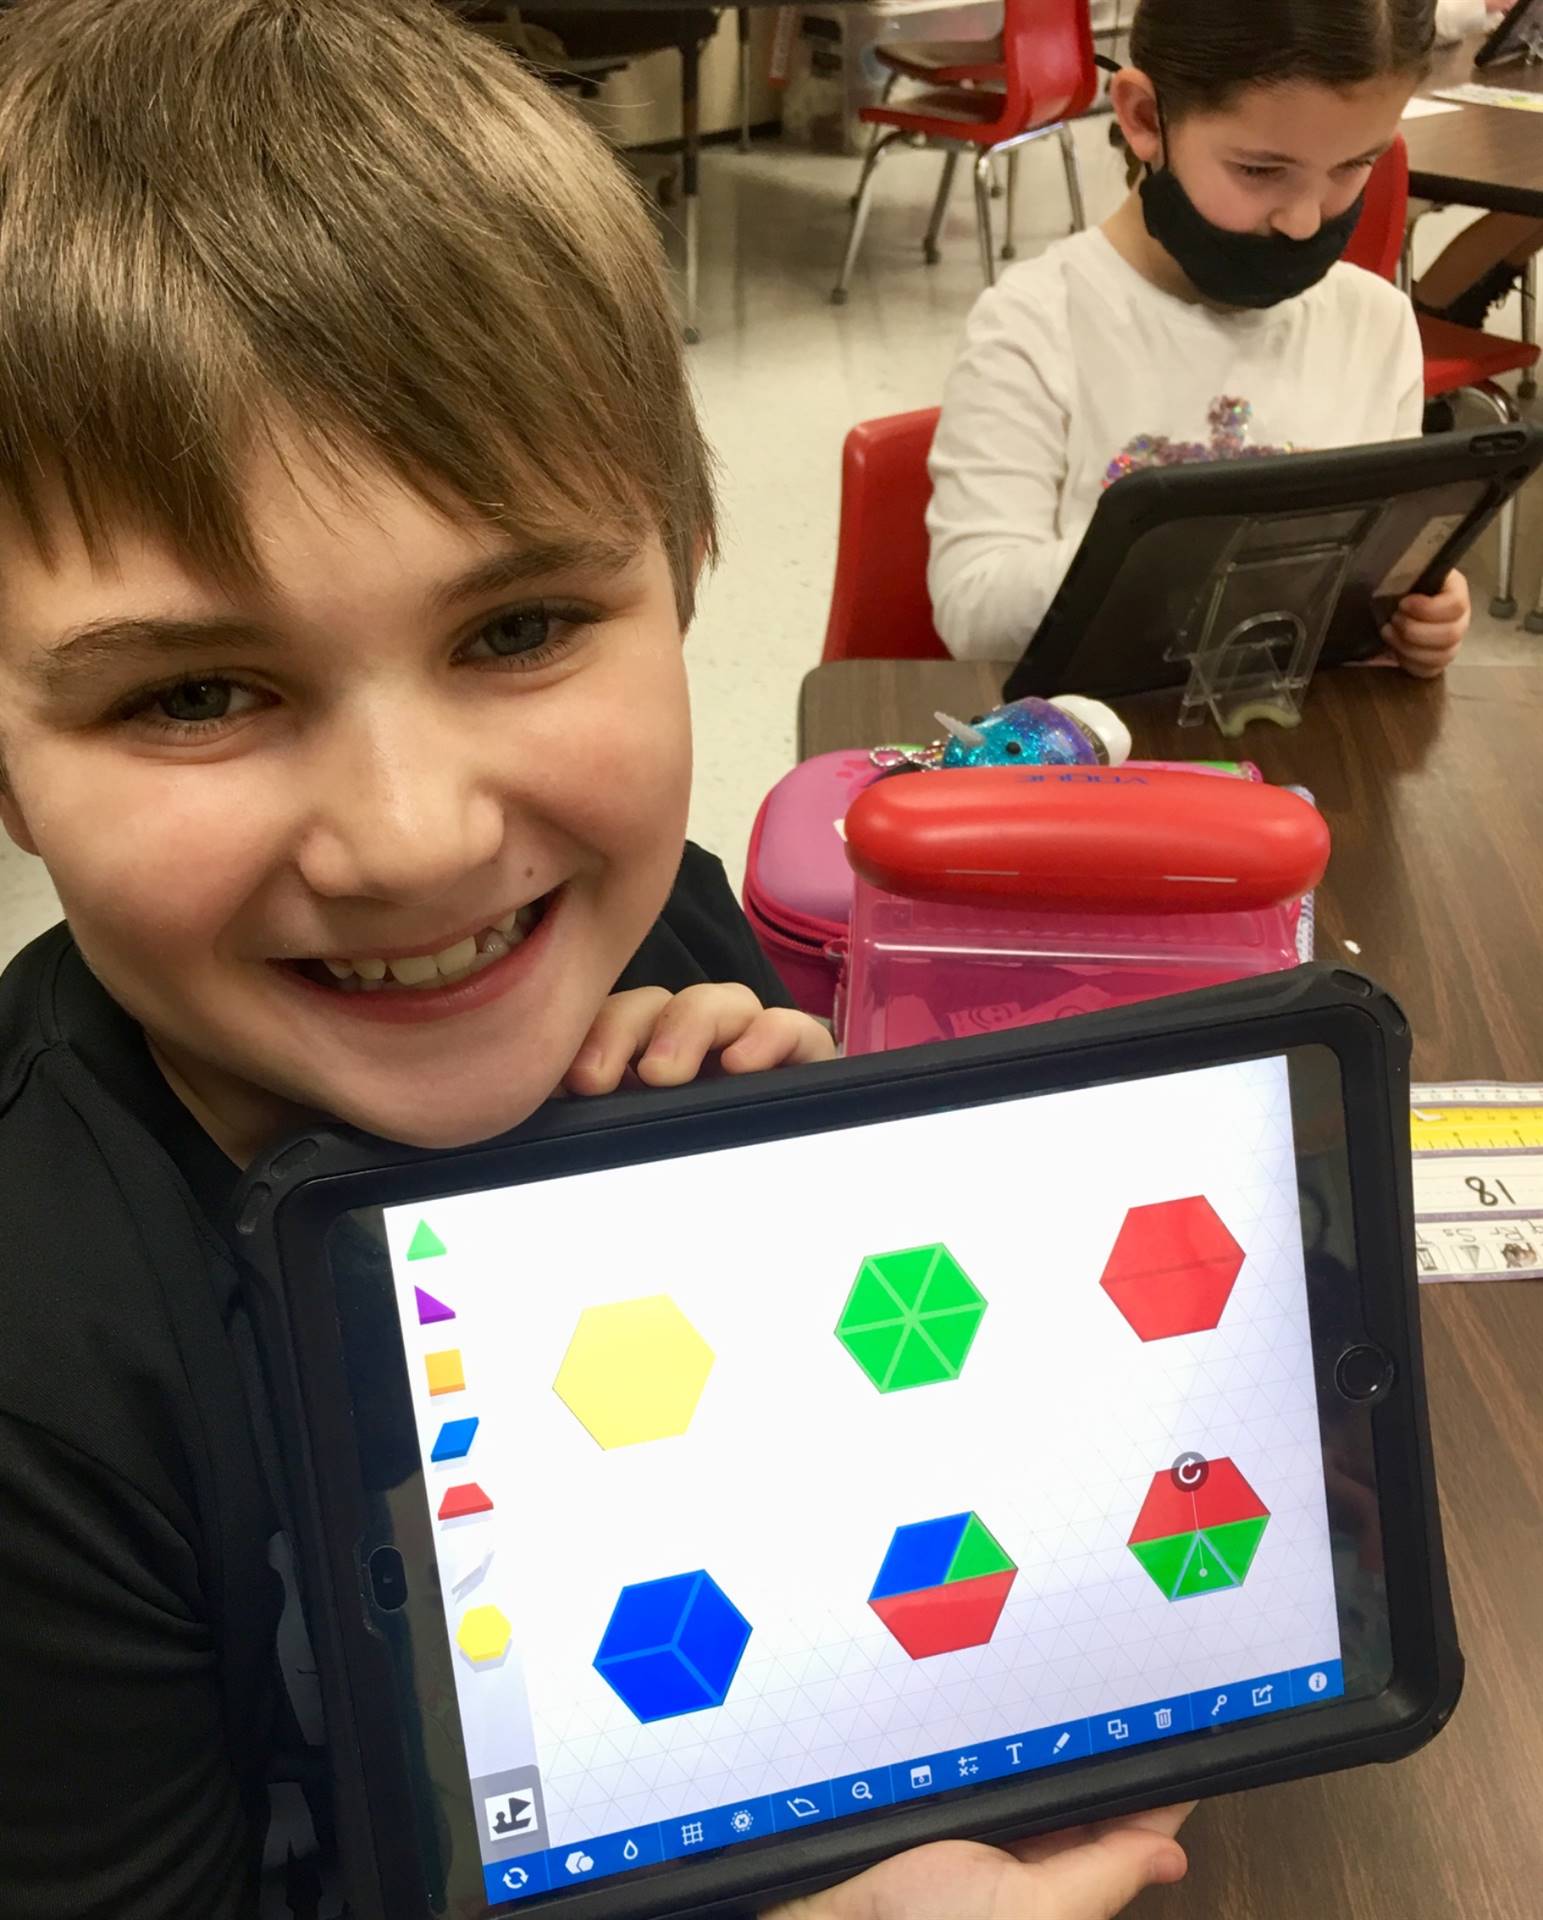 Student makes shapes with tablet